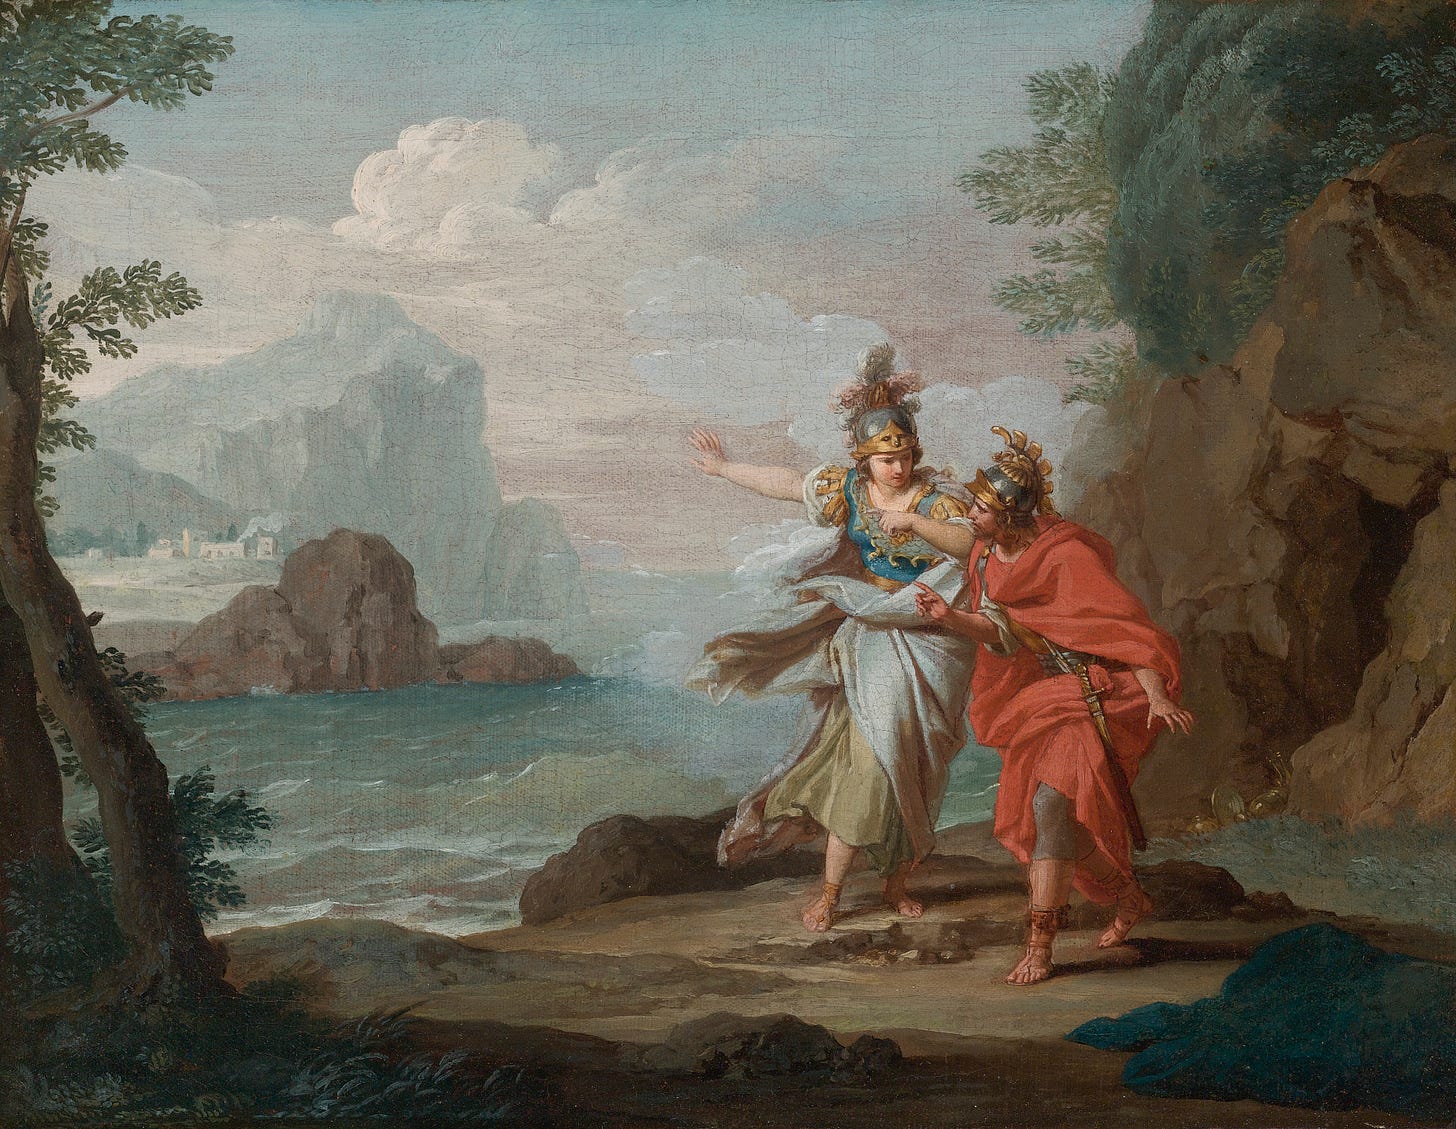 File:Athena appearing to Odysseus to reveal the Island of Ithaca by Giuseppe  Bottani.jpg - Wikimedia Commons